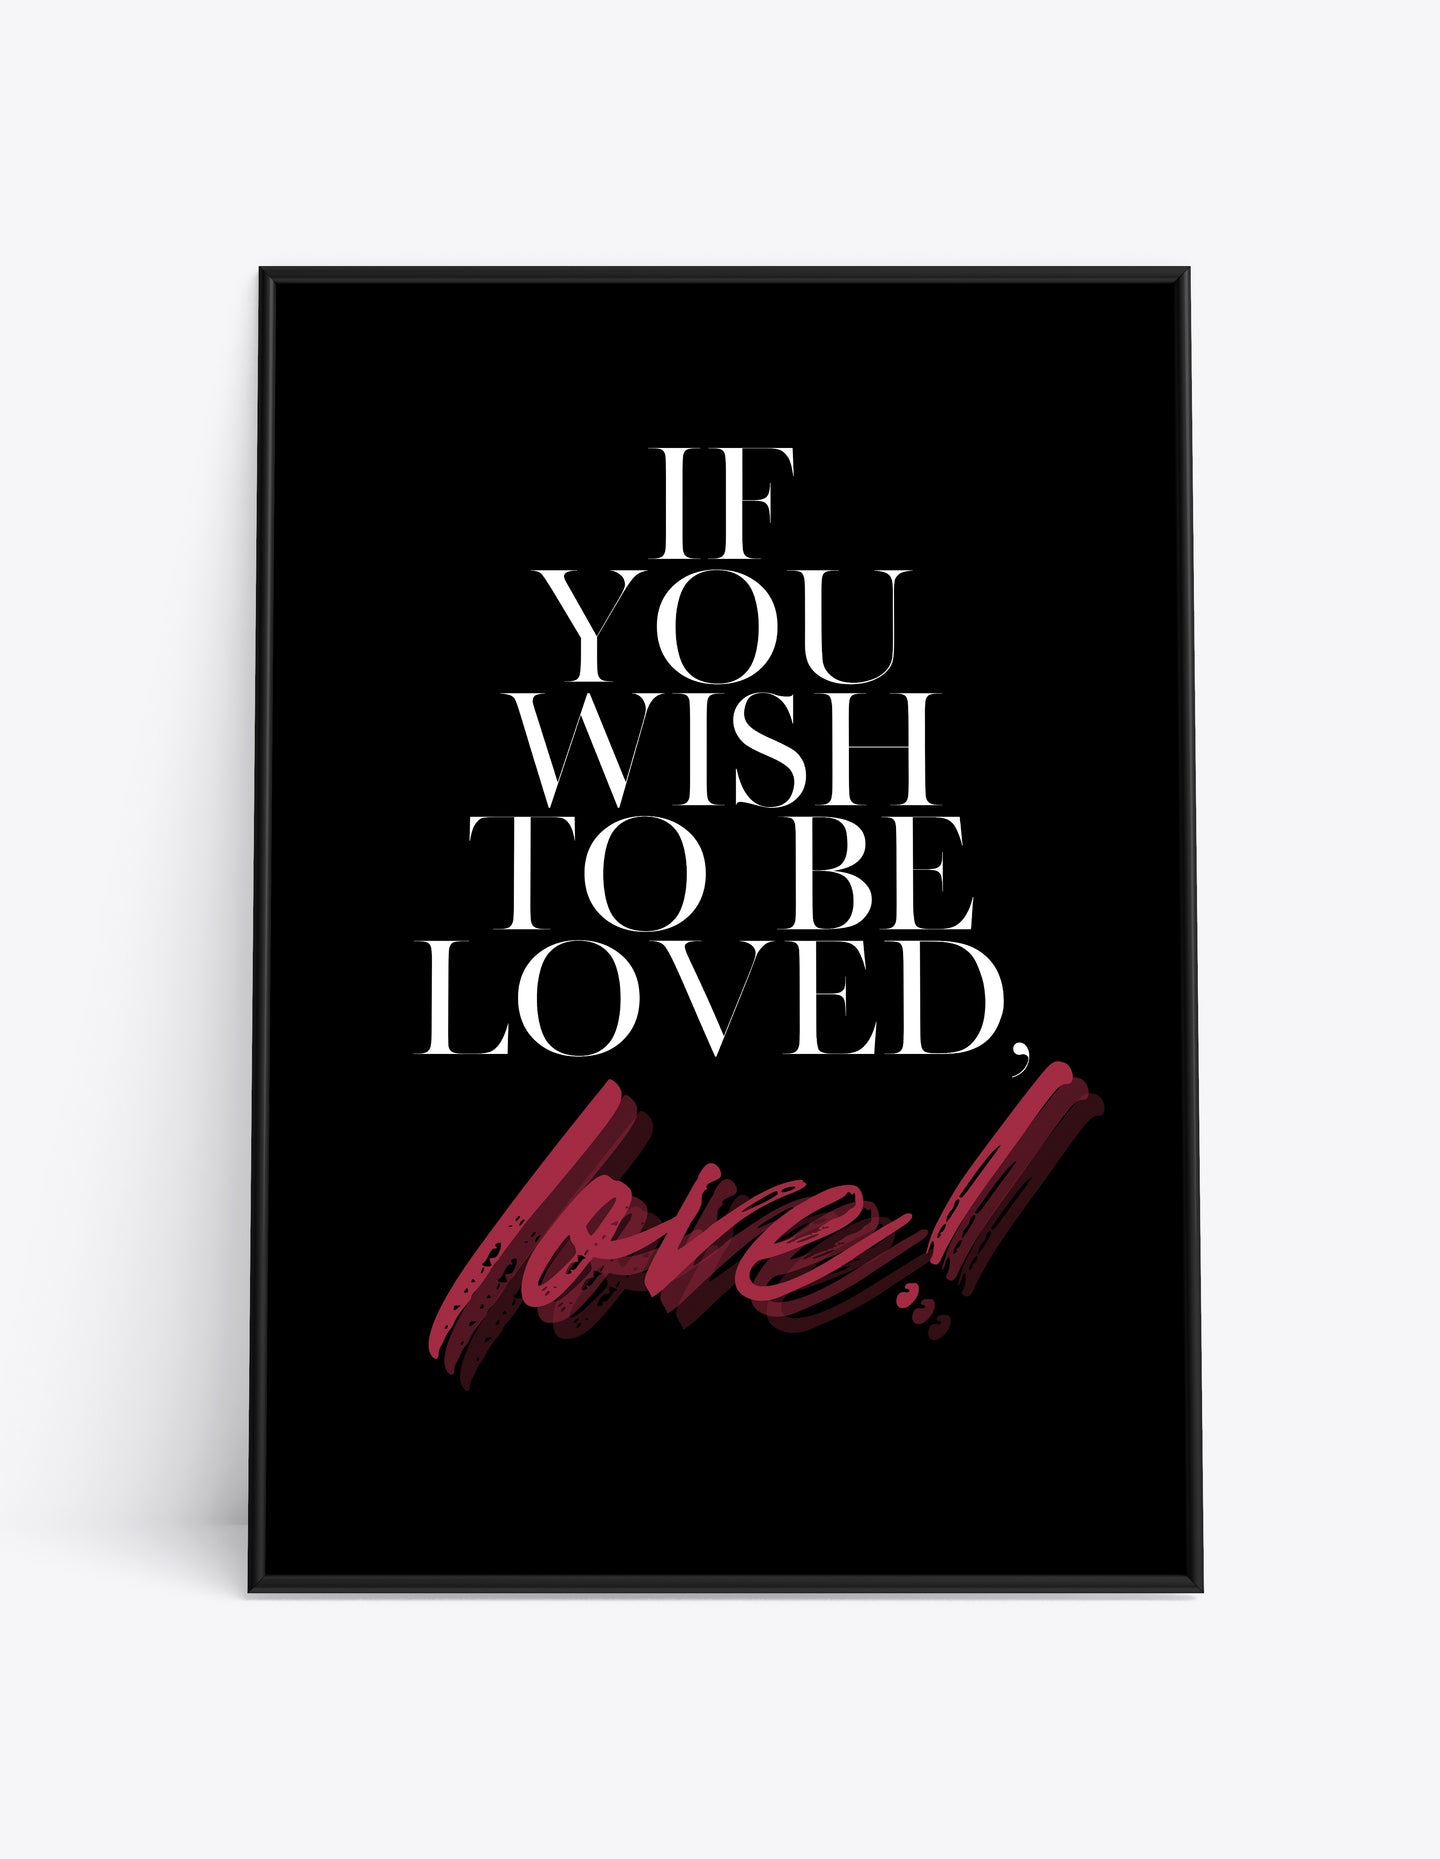 IF YOU WISH TO BE LOVED. LOVE!